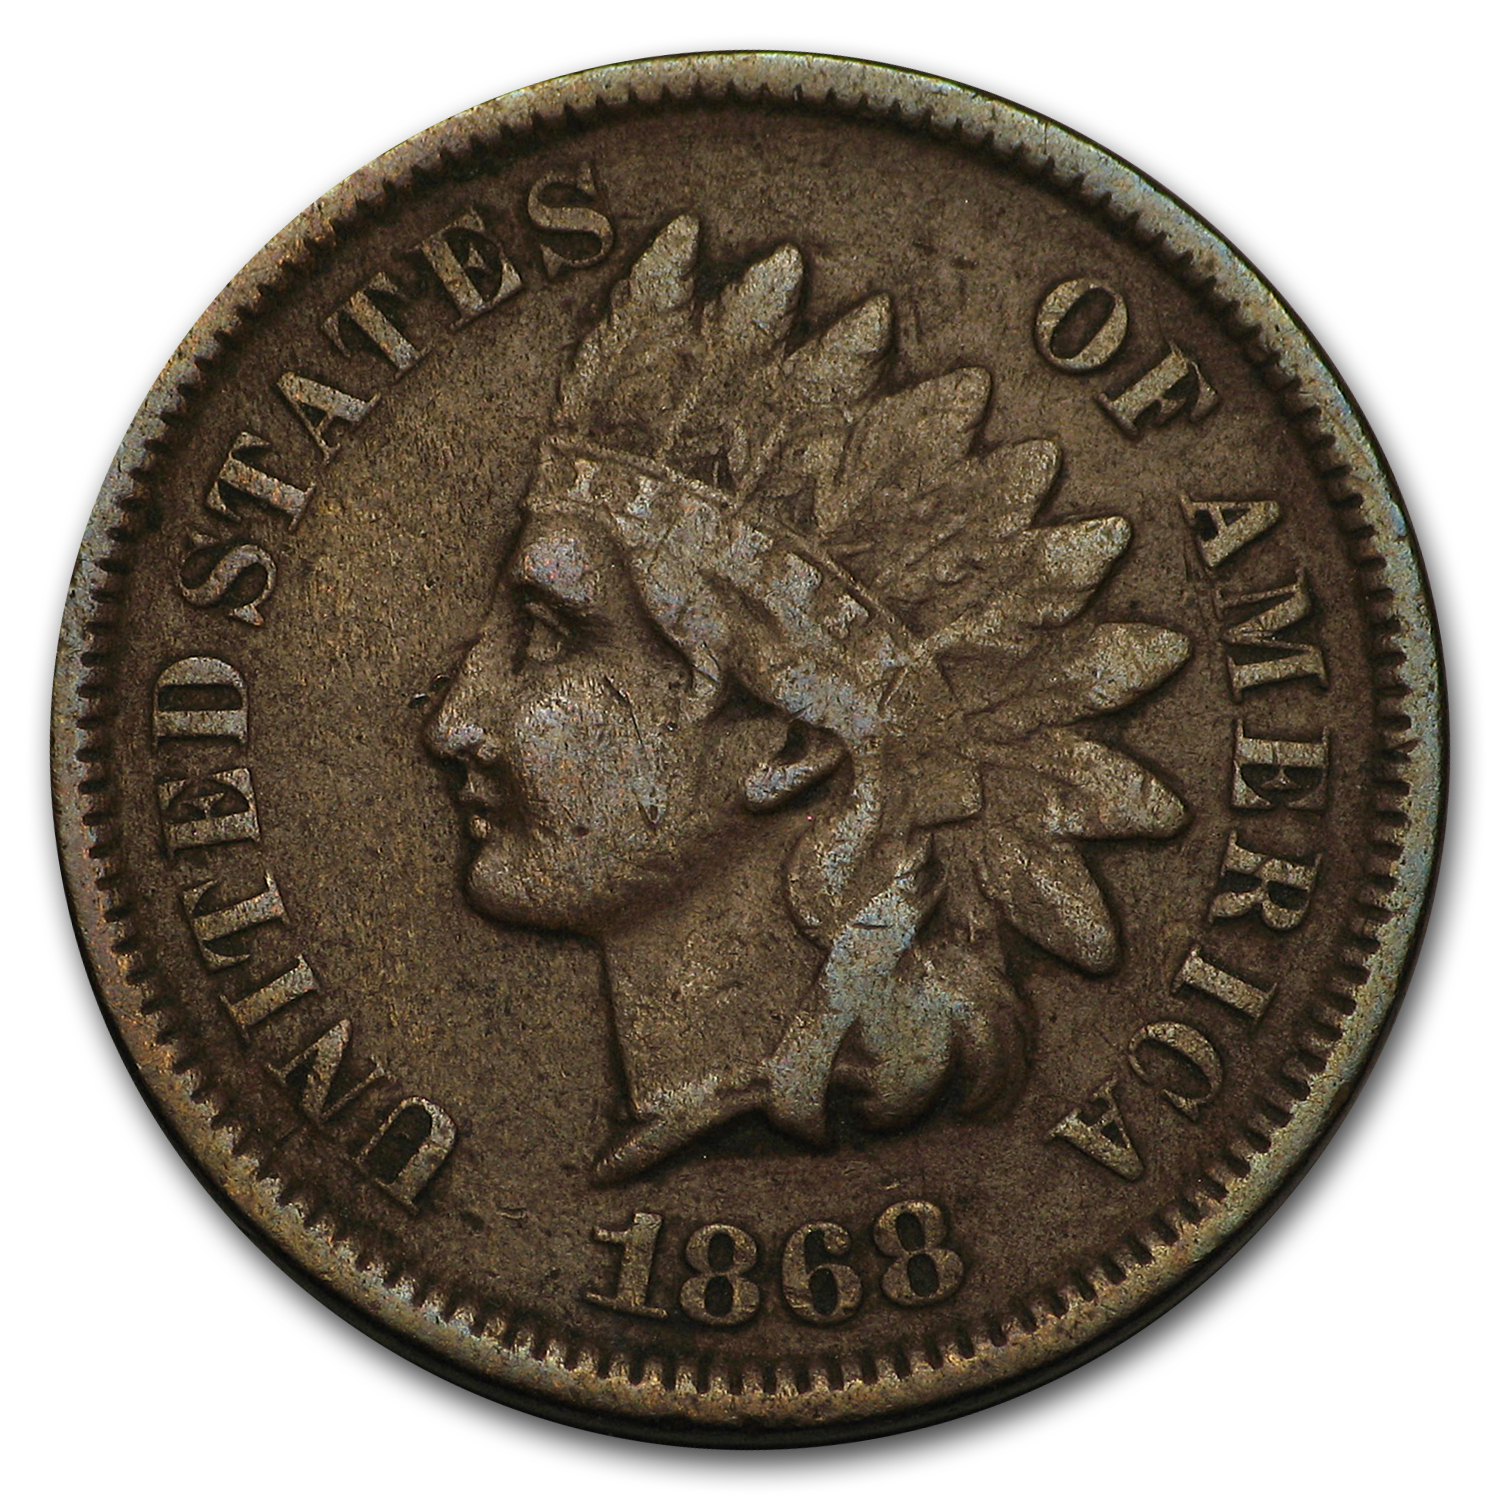 Buy 1868 Indian Head Cent VF